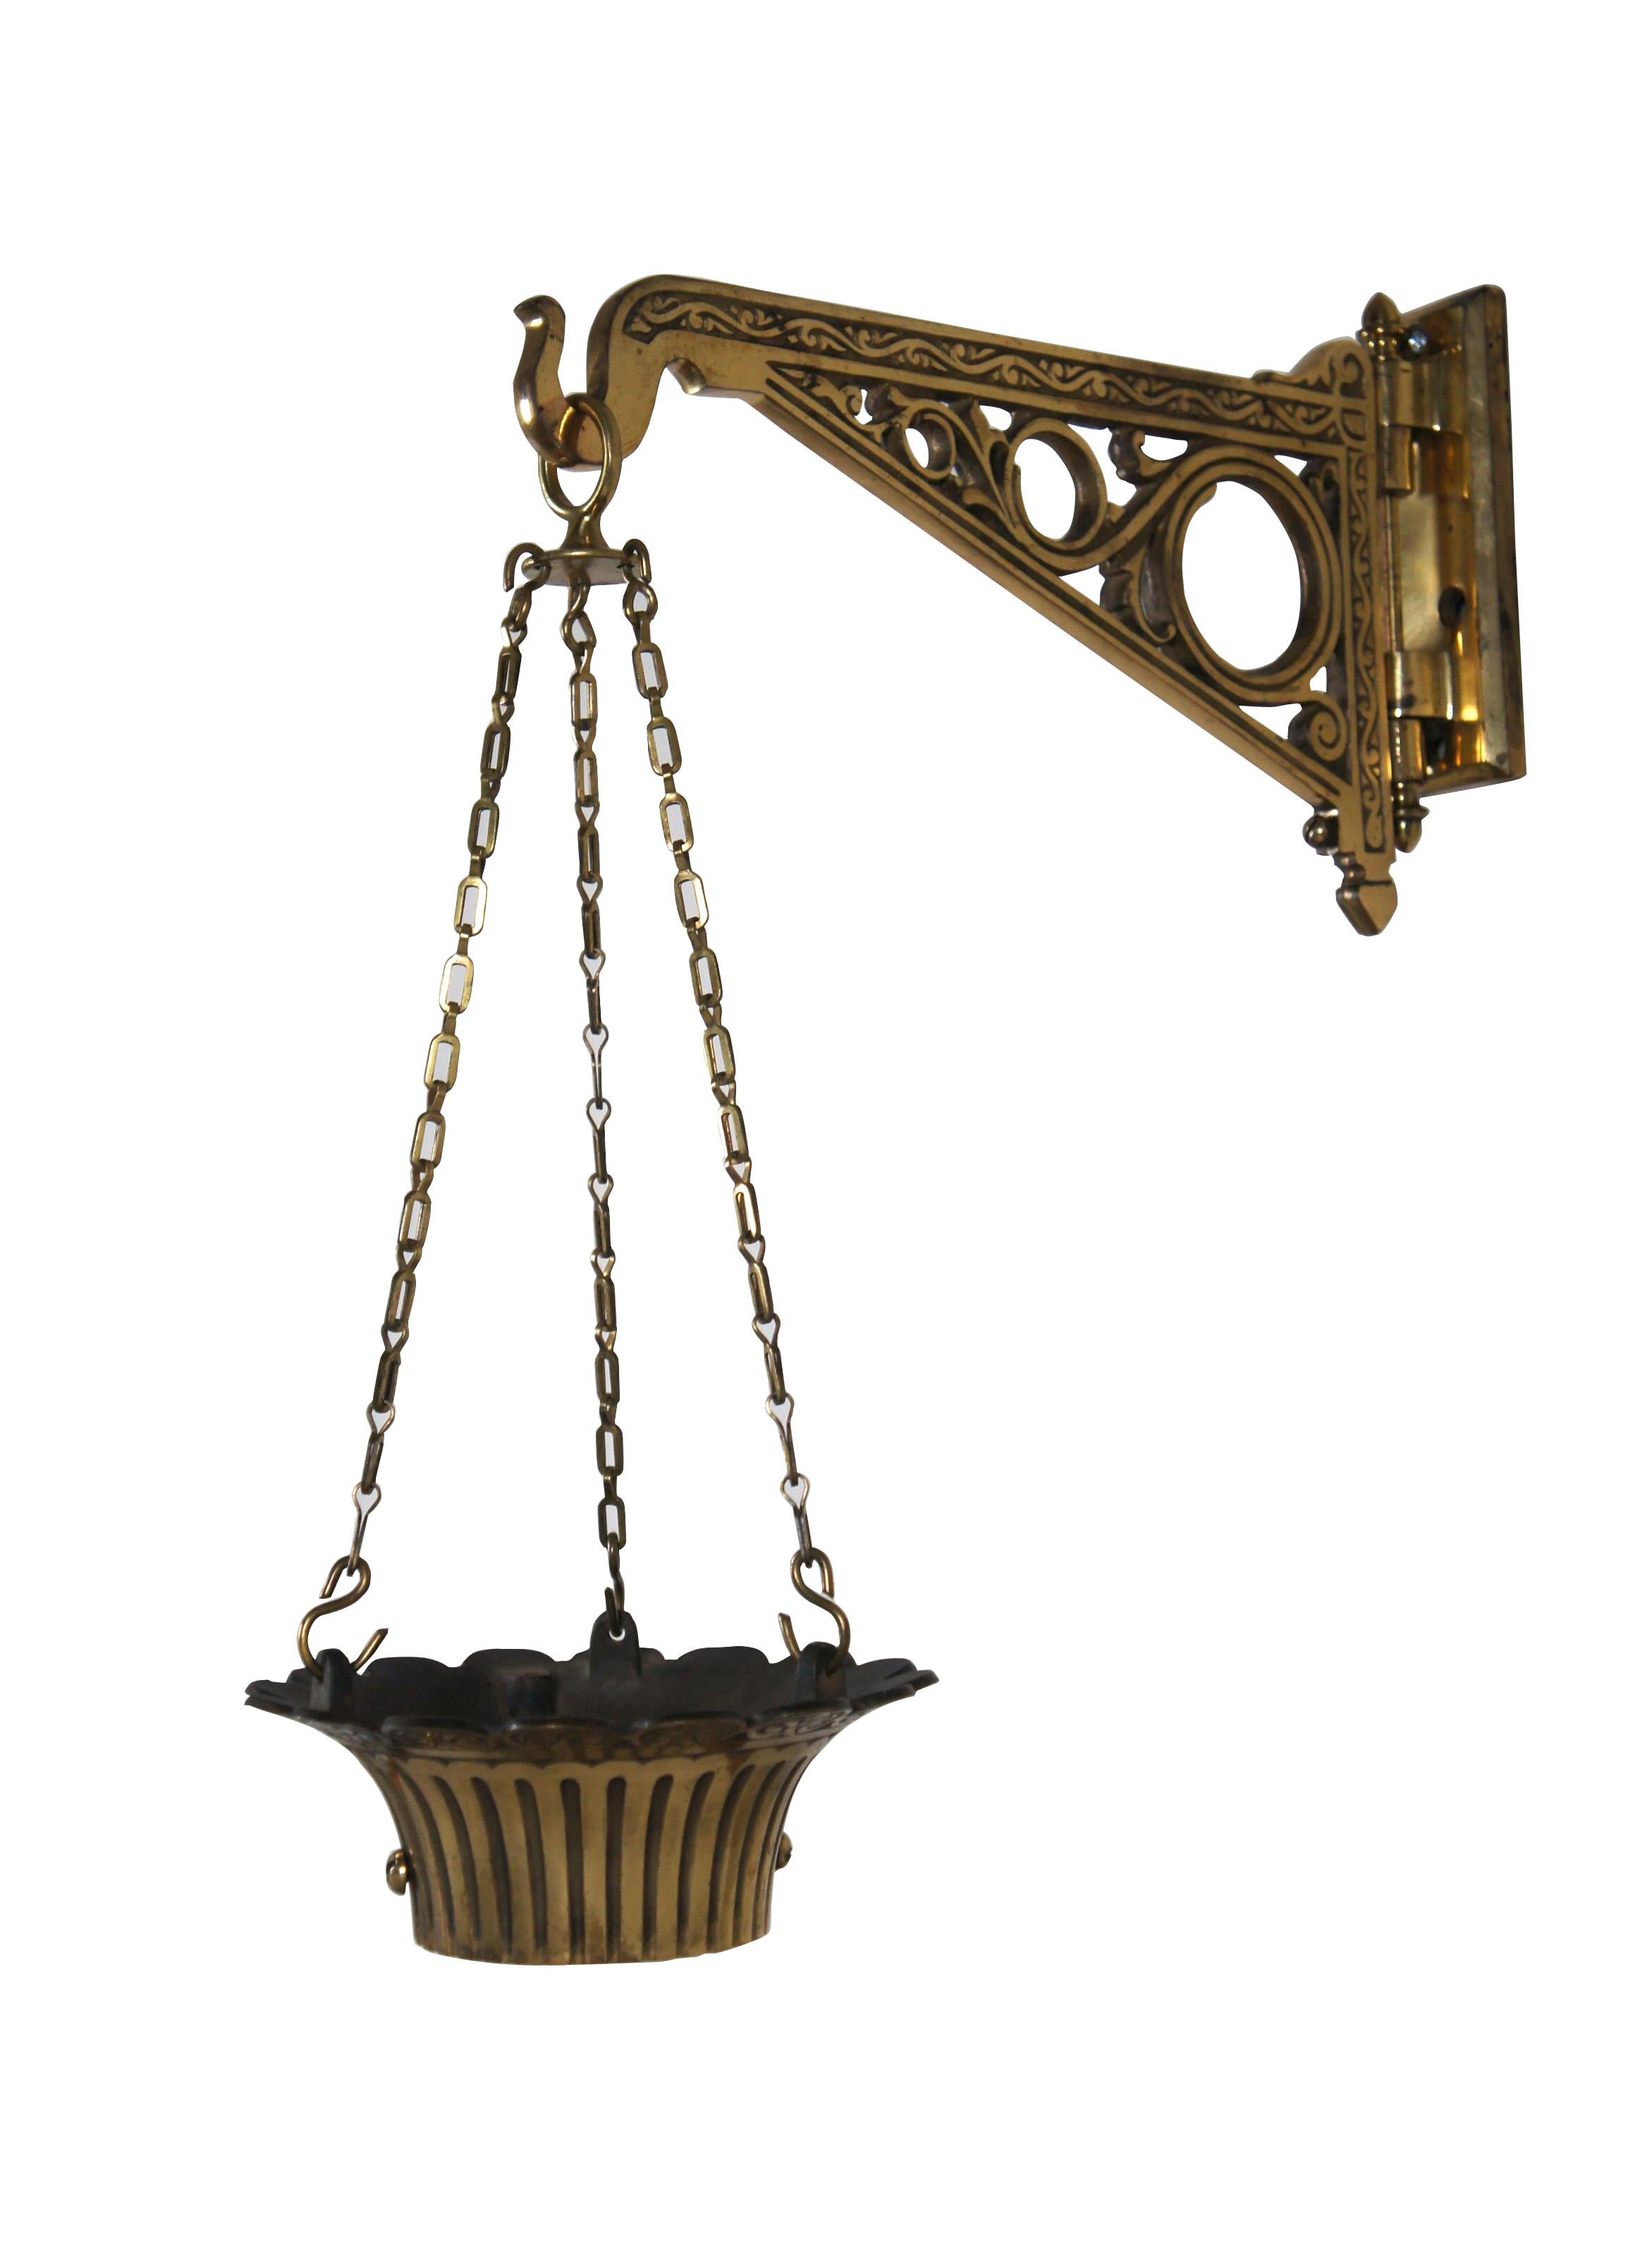 Late 19th - early 20th century solid brass, articulated / rotating wall bracket, chains, and collar for a pharmacist's / apothecary show globe. Bracket features etched and pierced swirling foliate designs and acorn shaped finials on the hinge. Hinge